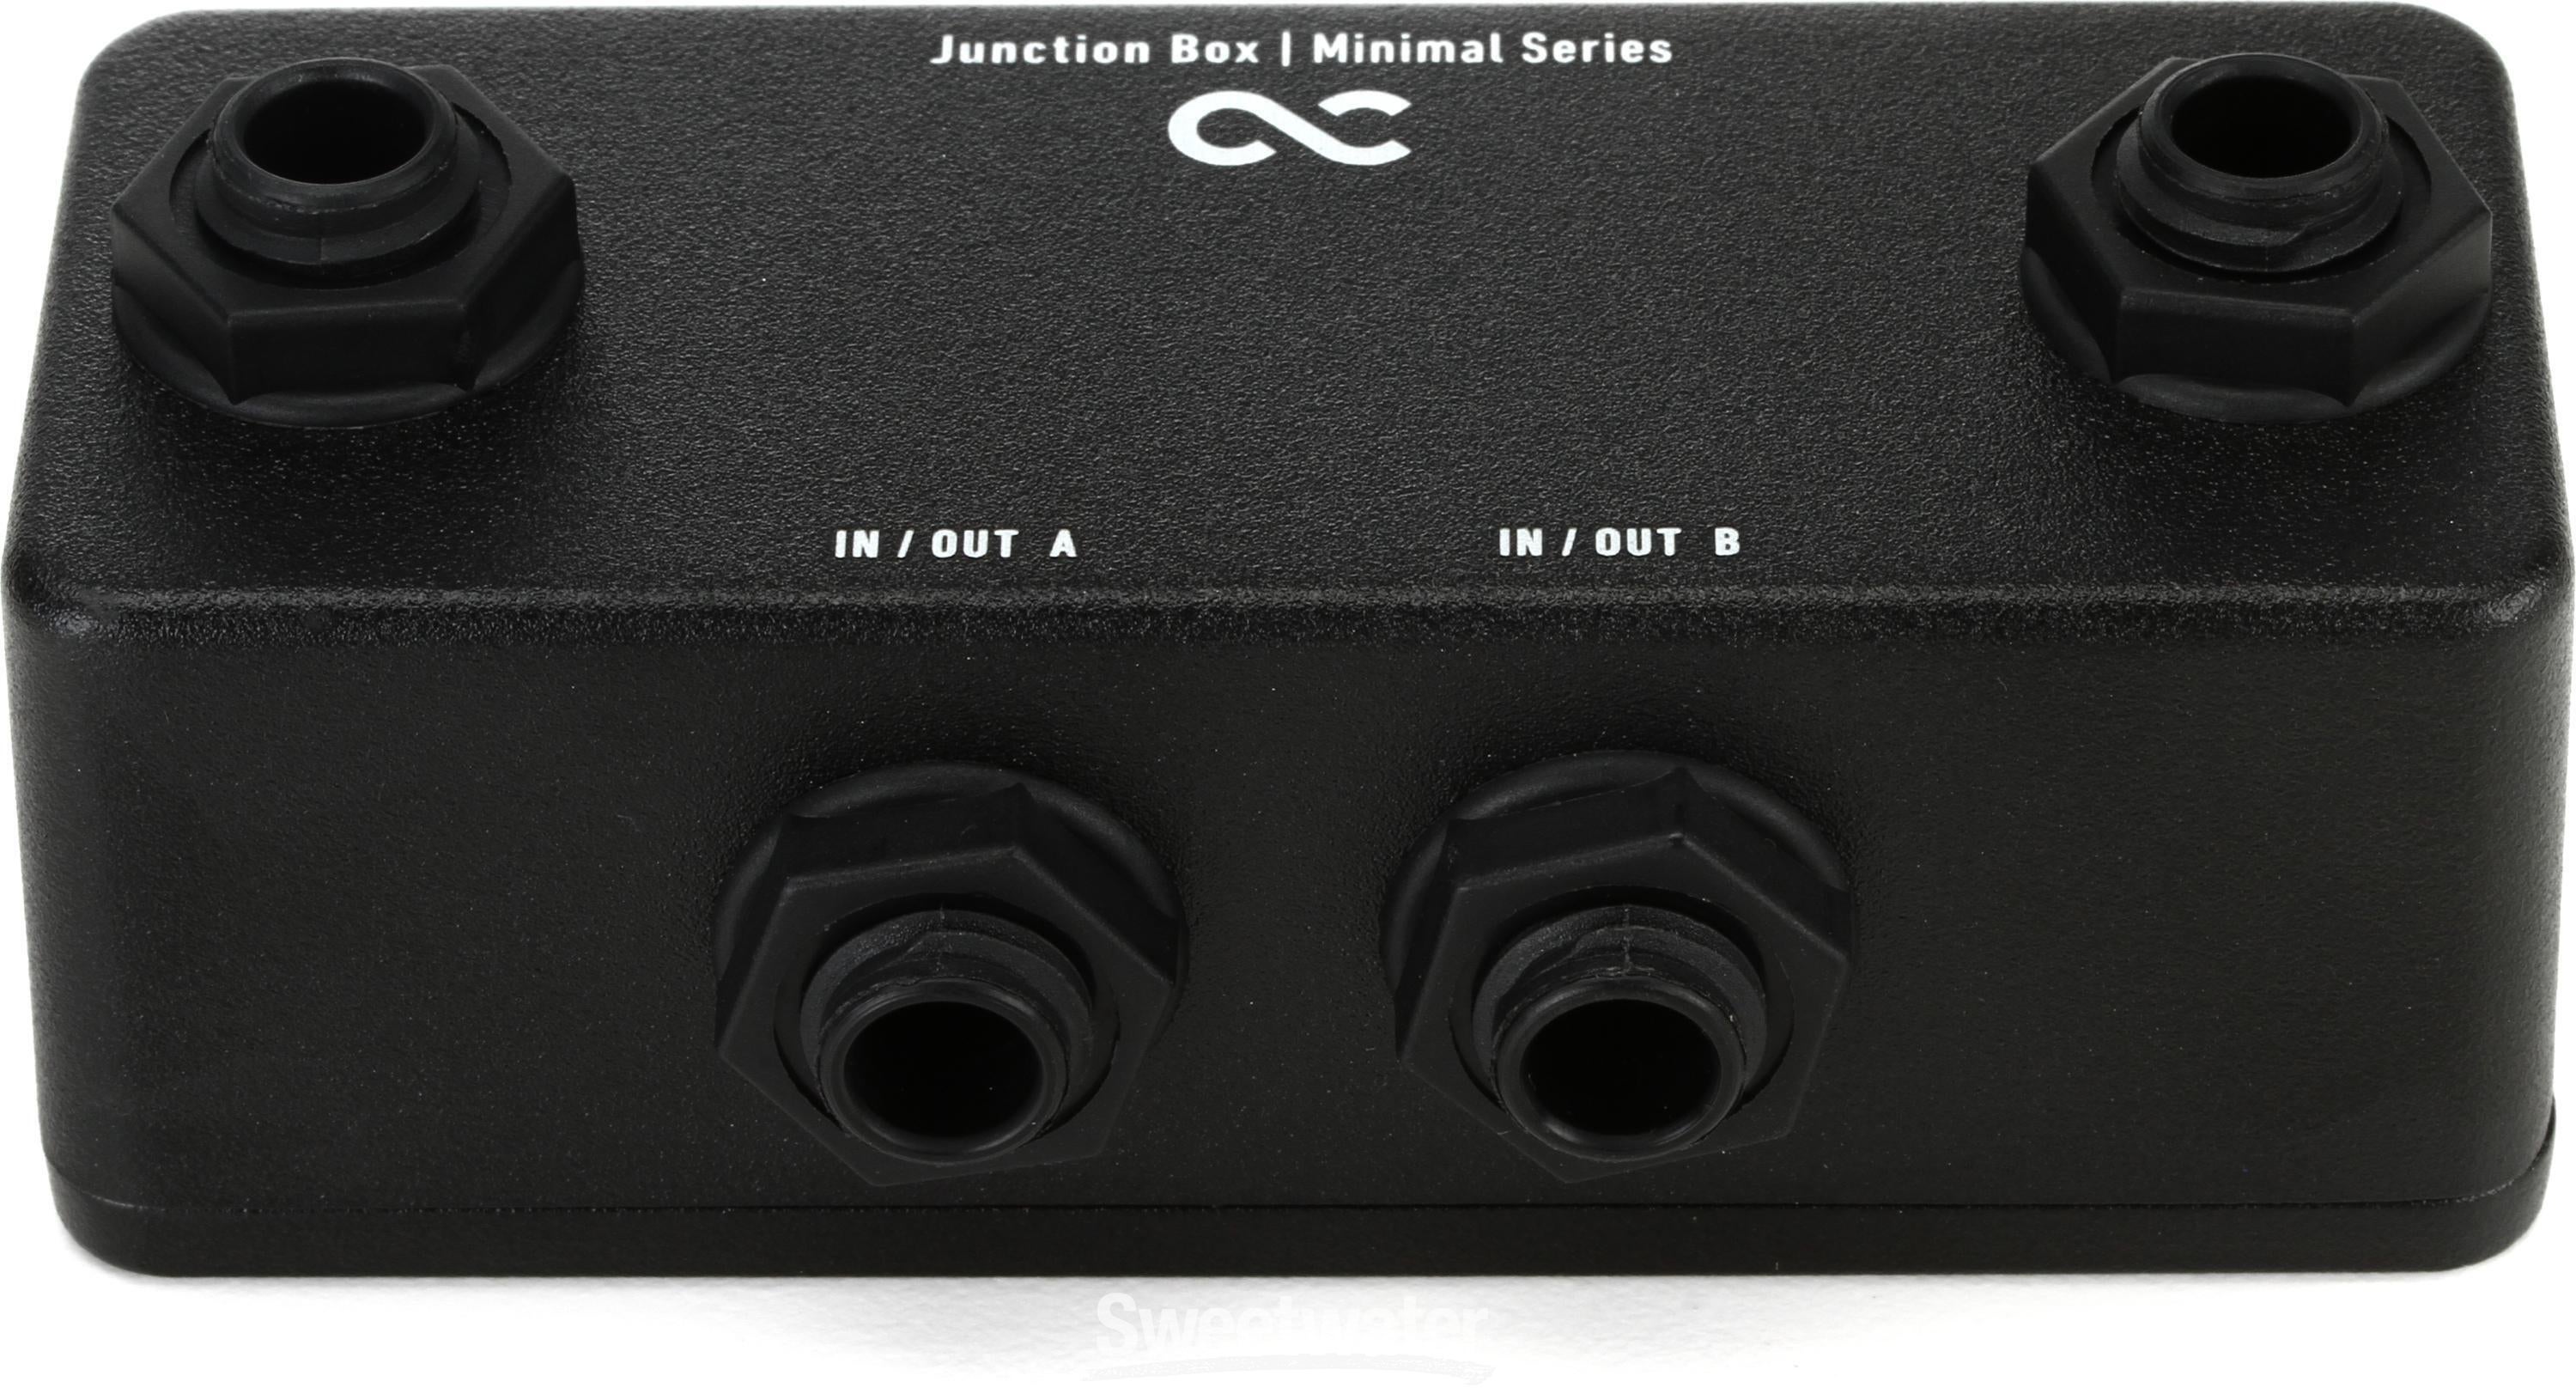 One Control Minimal Series Junction Box